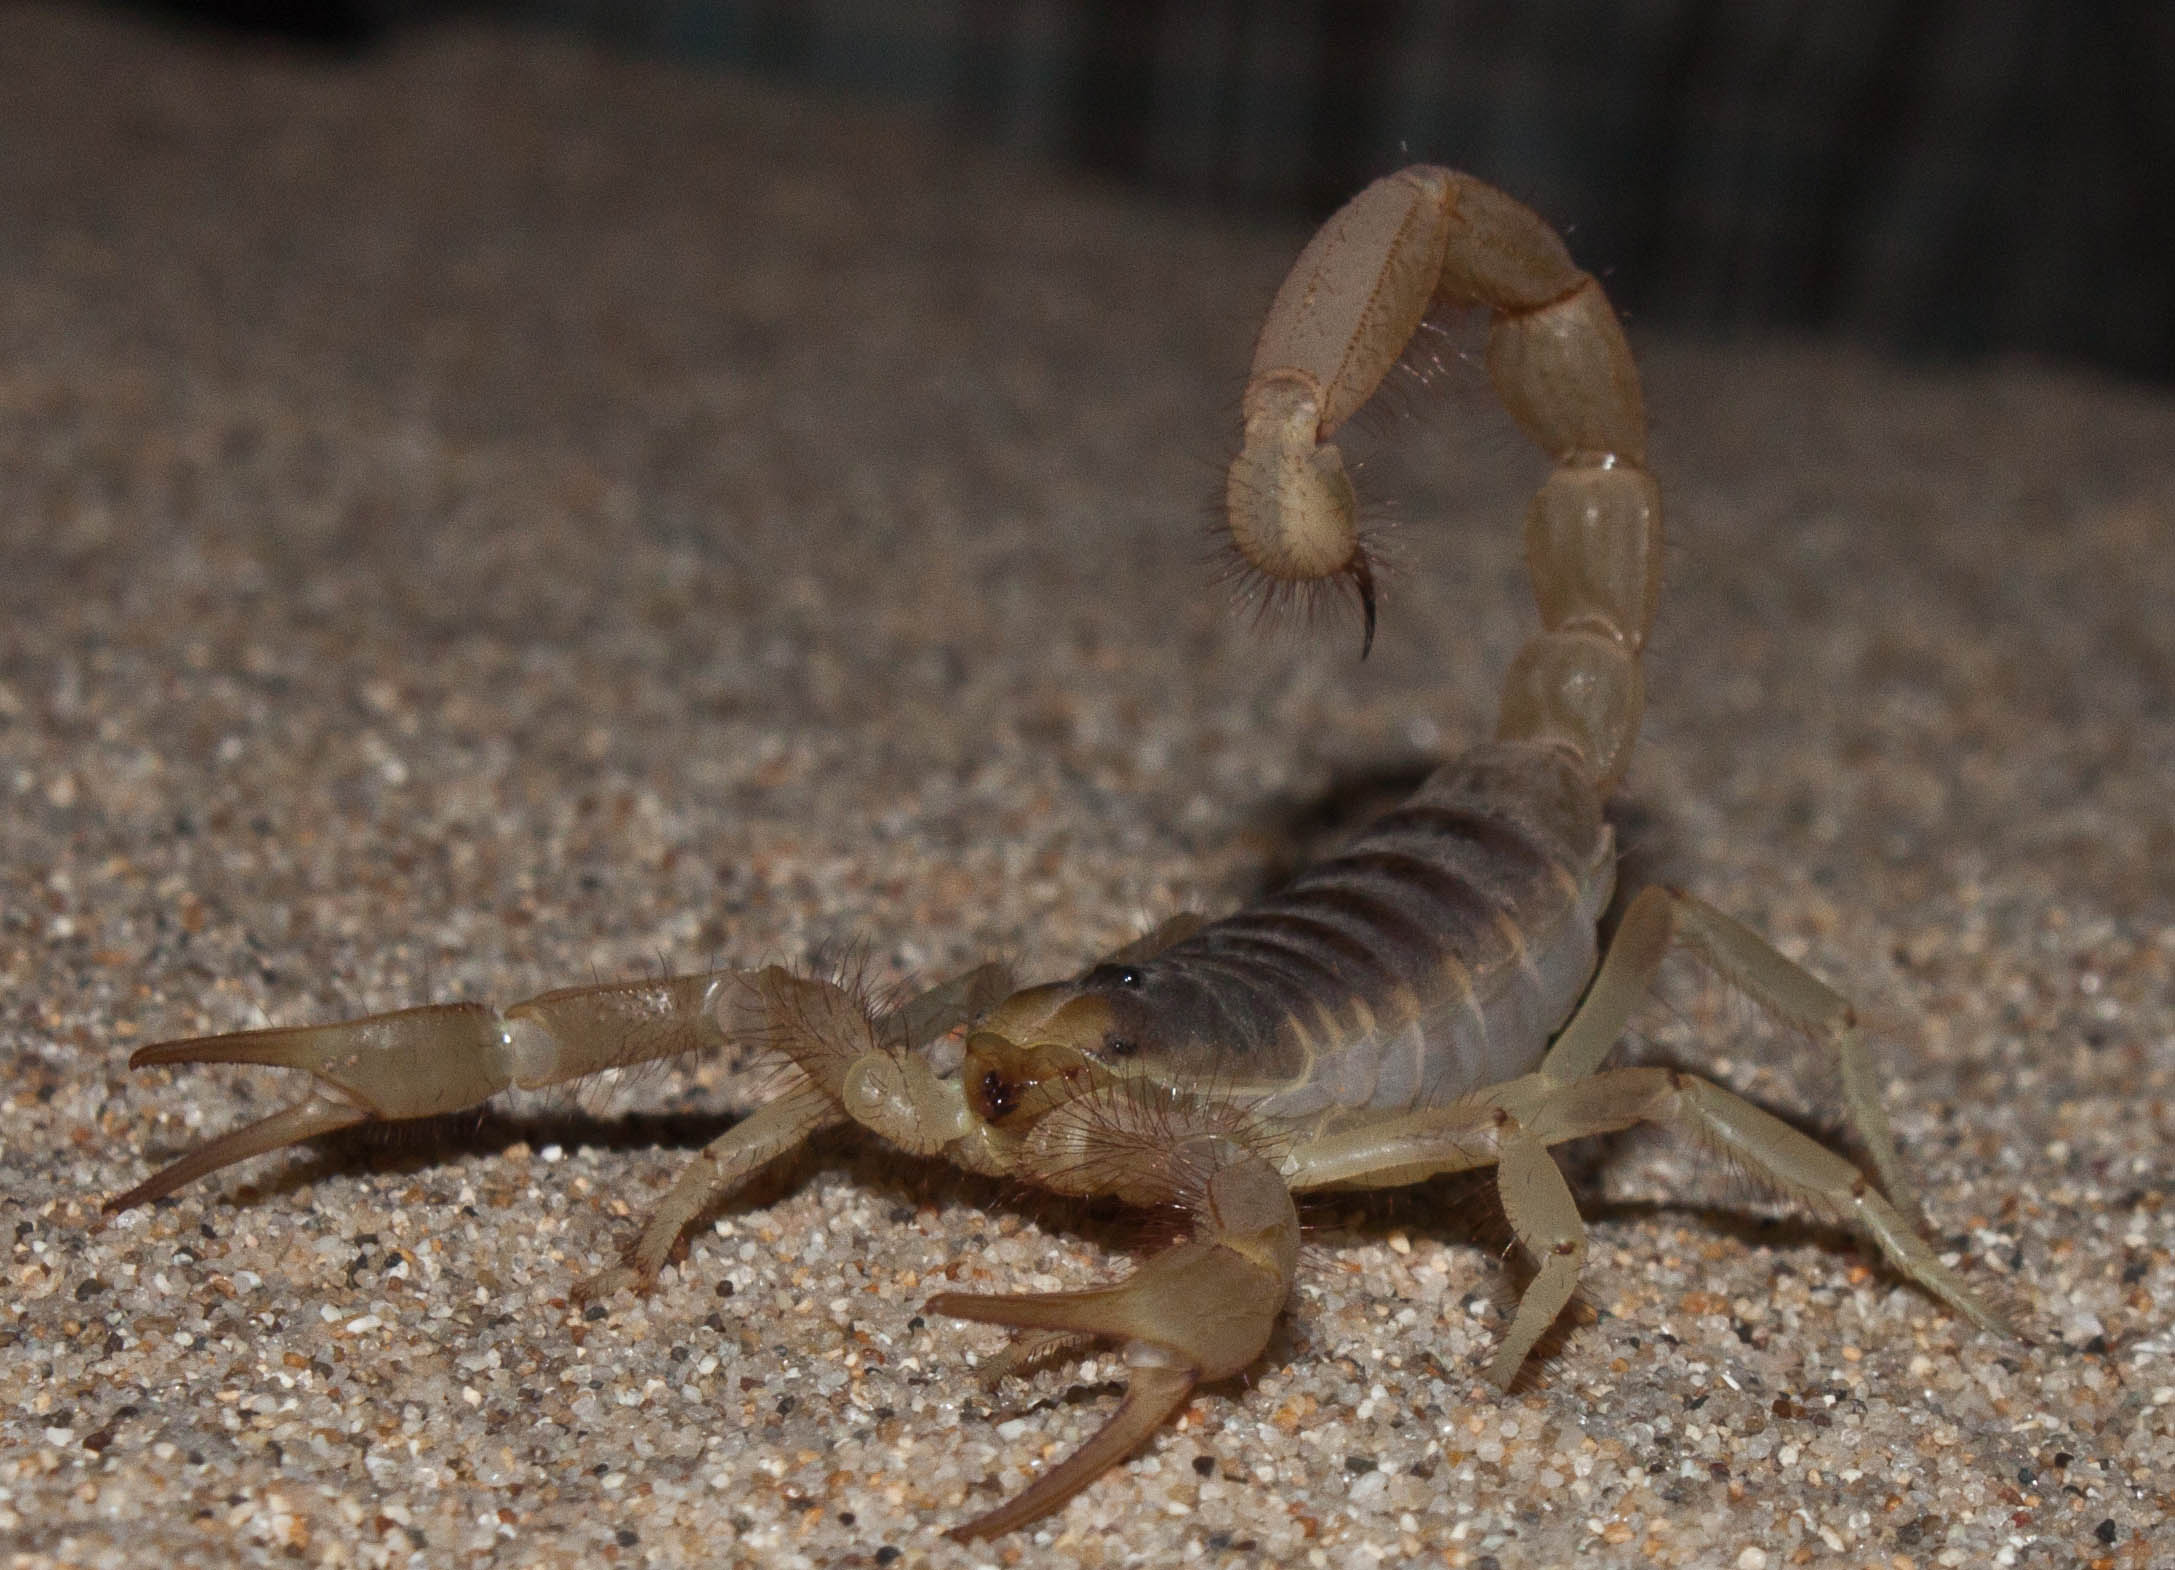 a scorpion on the sand with a very small amount of body